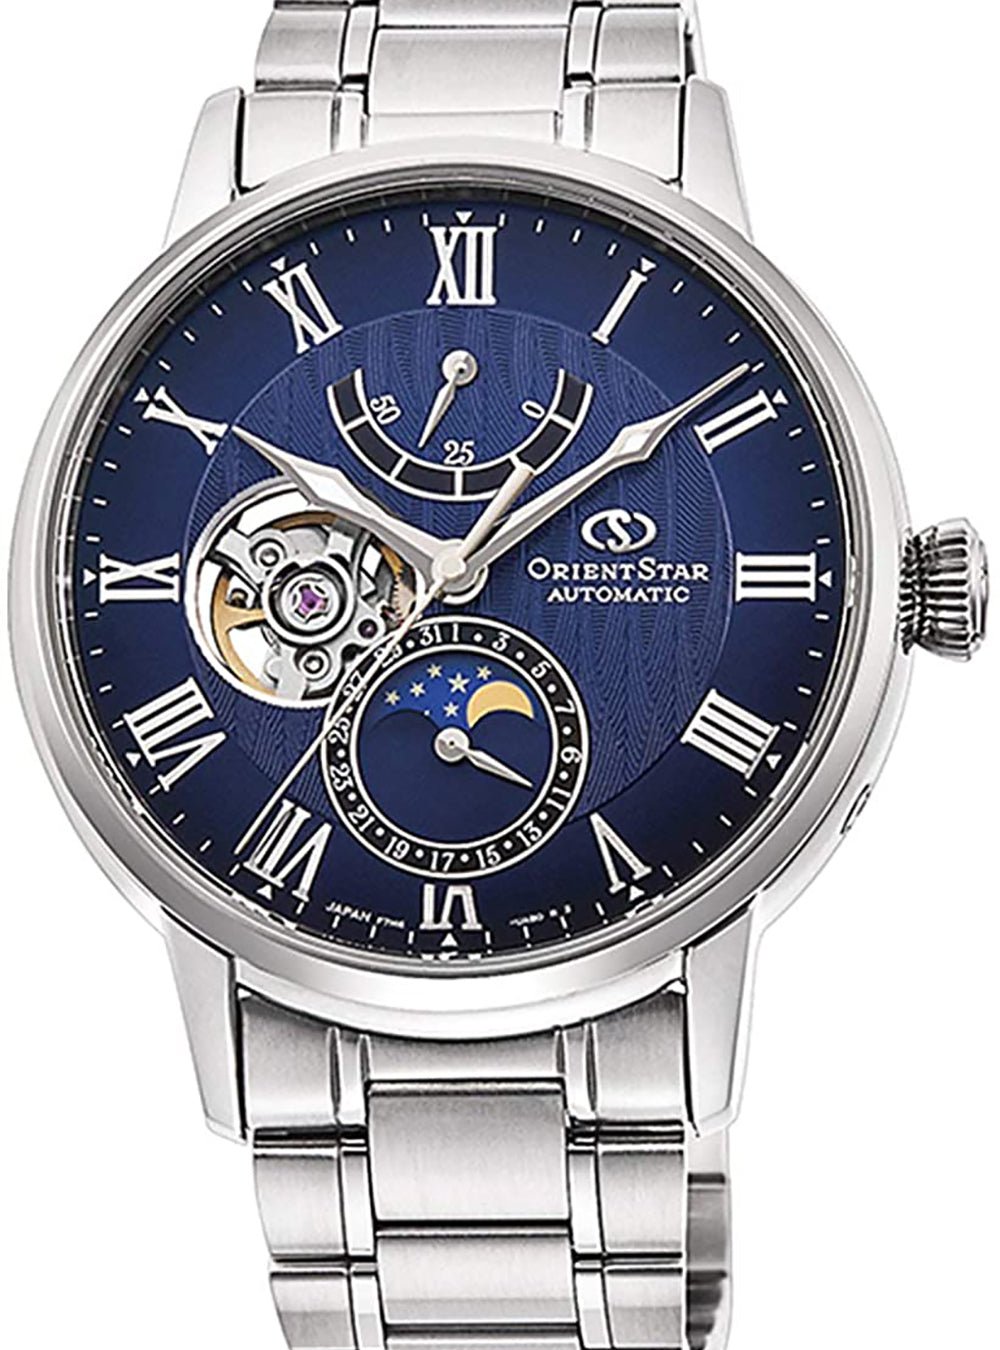 ORIENT STAR CLASSIC MECHANICAL MOON PHASE RK-AY0103L MADE IN JAPAN JDMjapan-select4906006287390WRISTWATCHORIENT